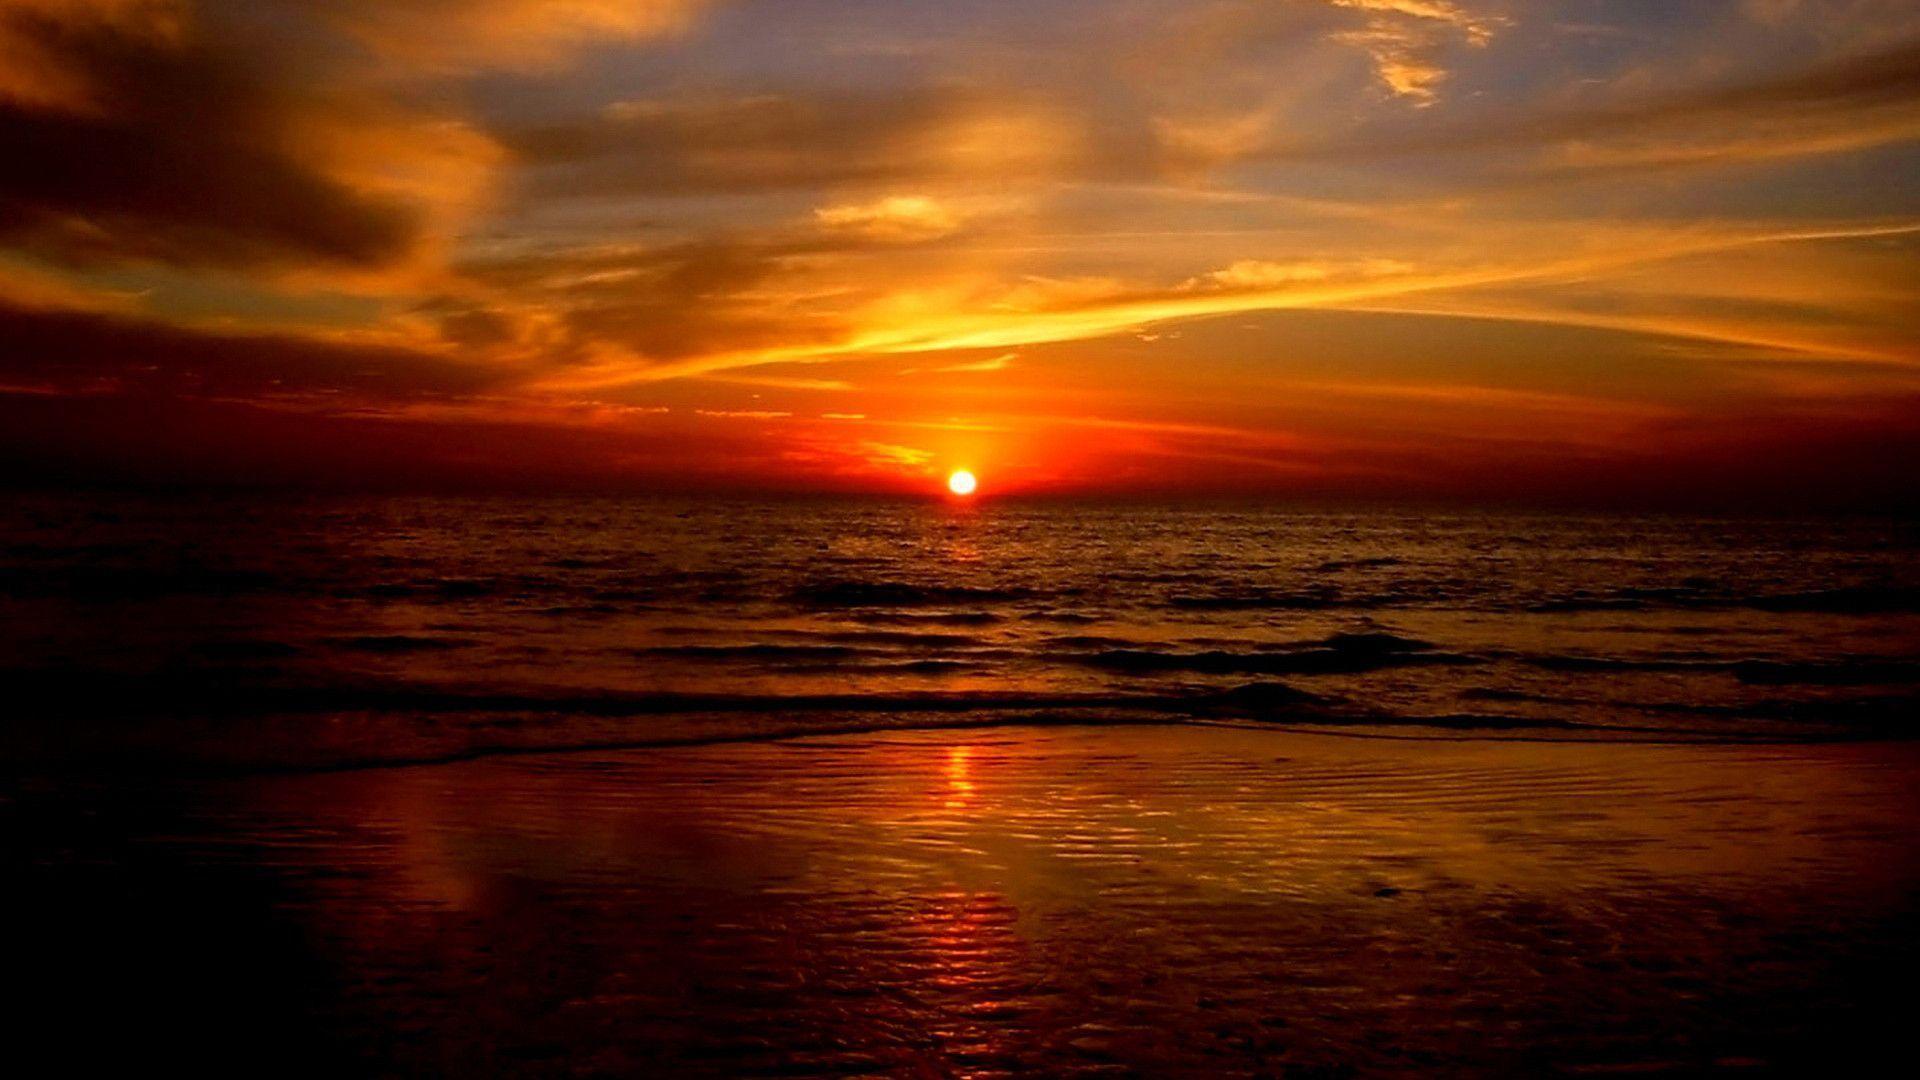 Download Ocean Sunset Pictures 5272 1920x1080 px High Resolution